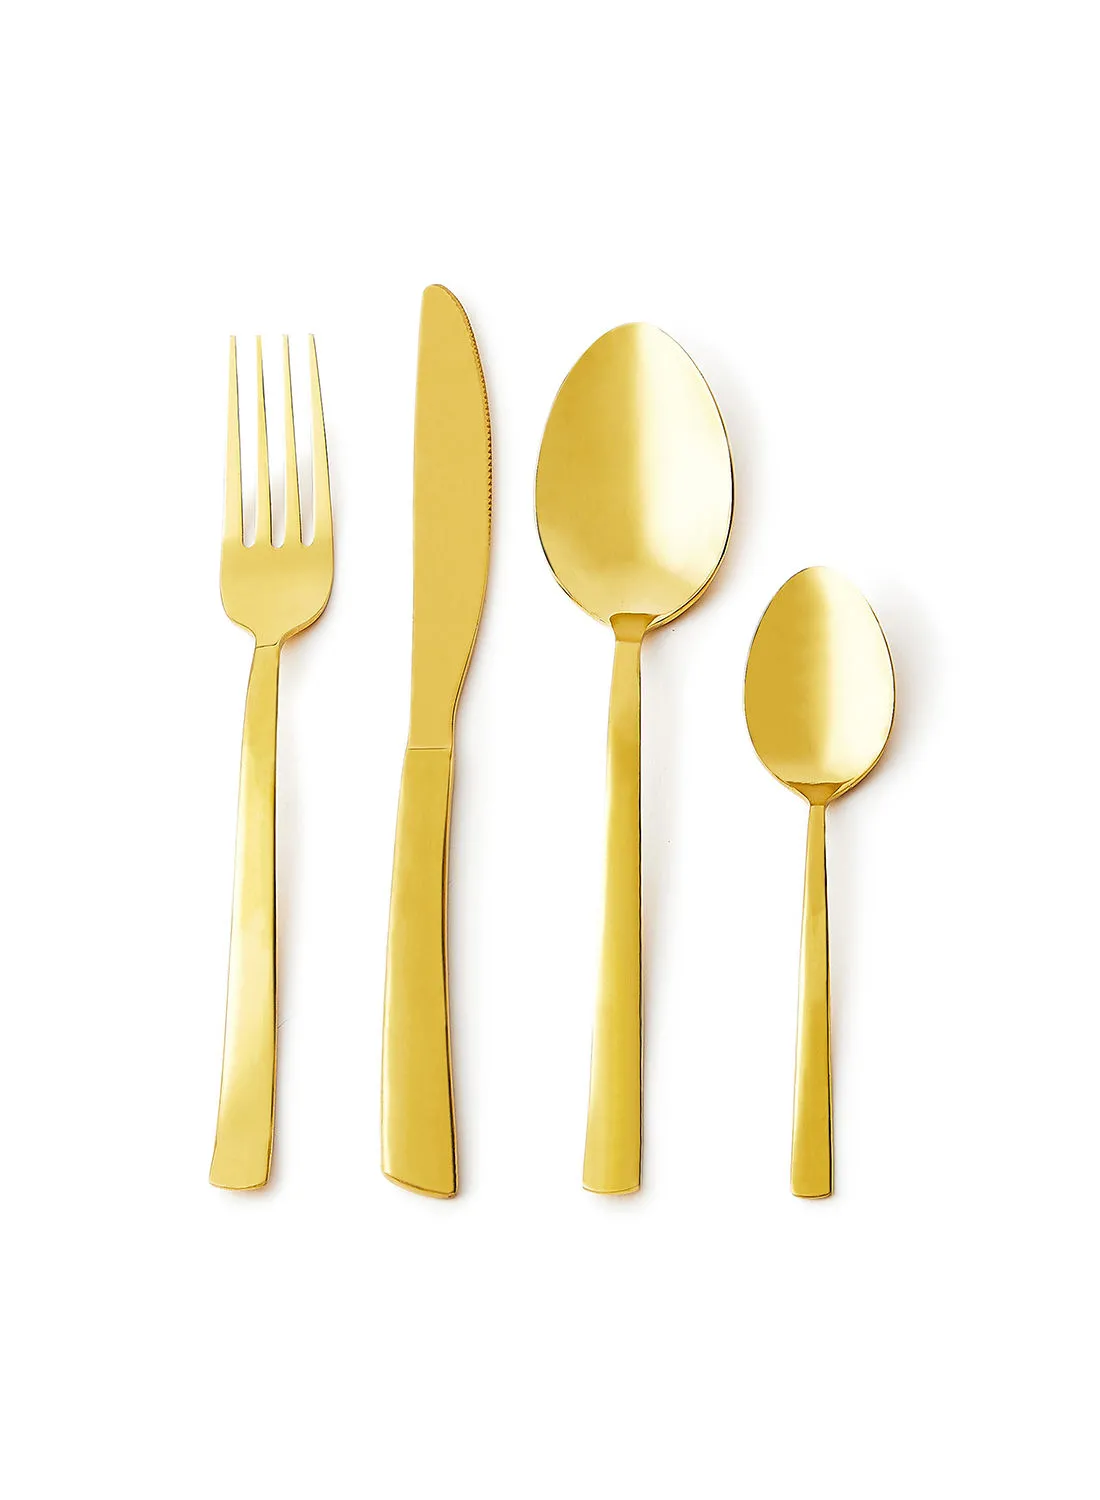 noon east 16 Piece Cutlery Set - Made Of Stainless Steel - Silverware Flatware - Spoons And Forks Set, Spoon Set - Table Spoons, Tea Spoons, Forks, Knives - Serves 4 - Design Gold Spade